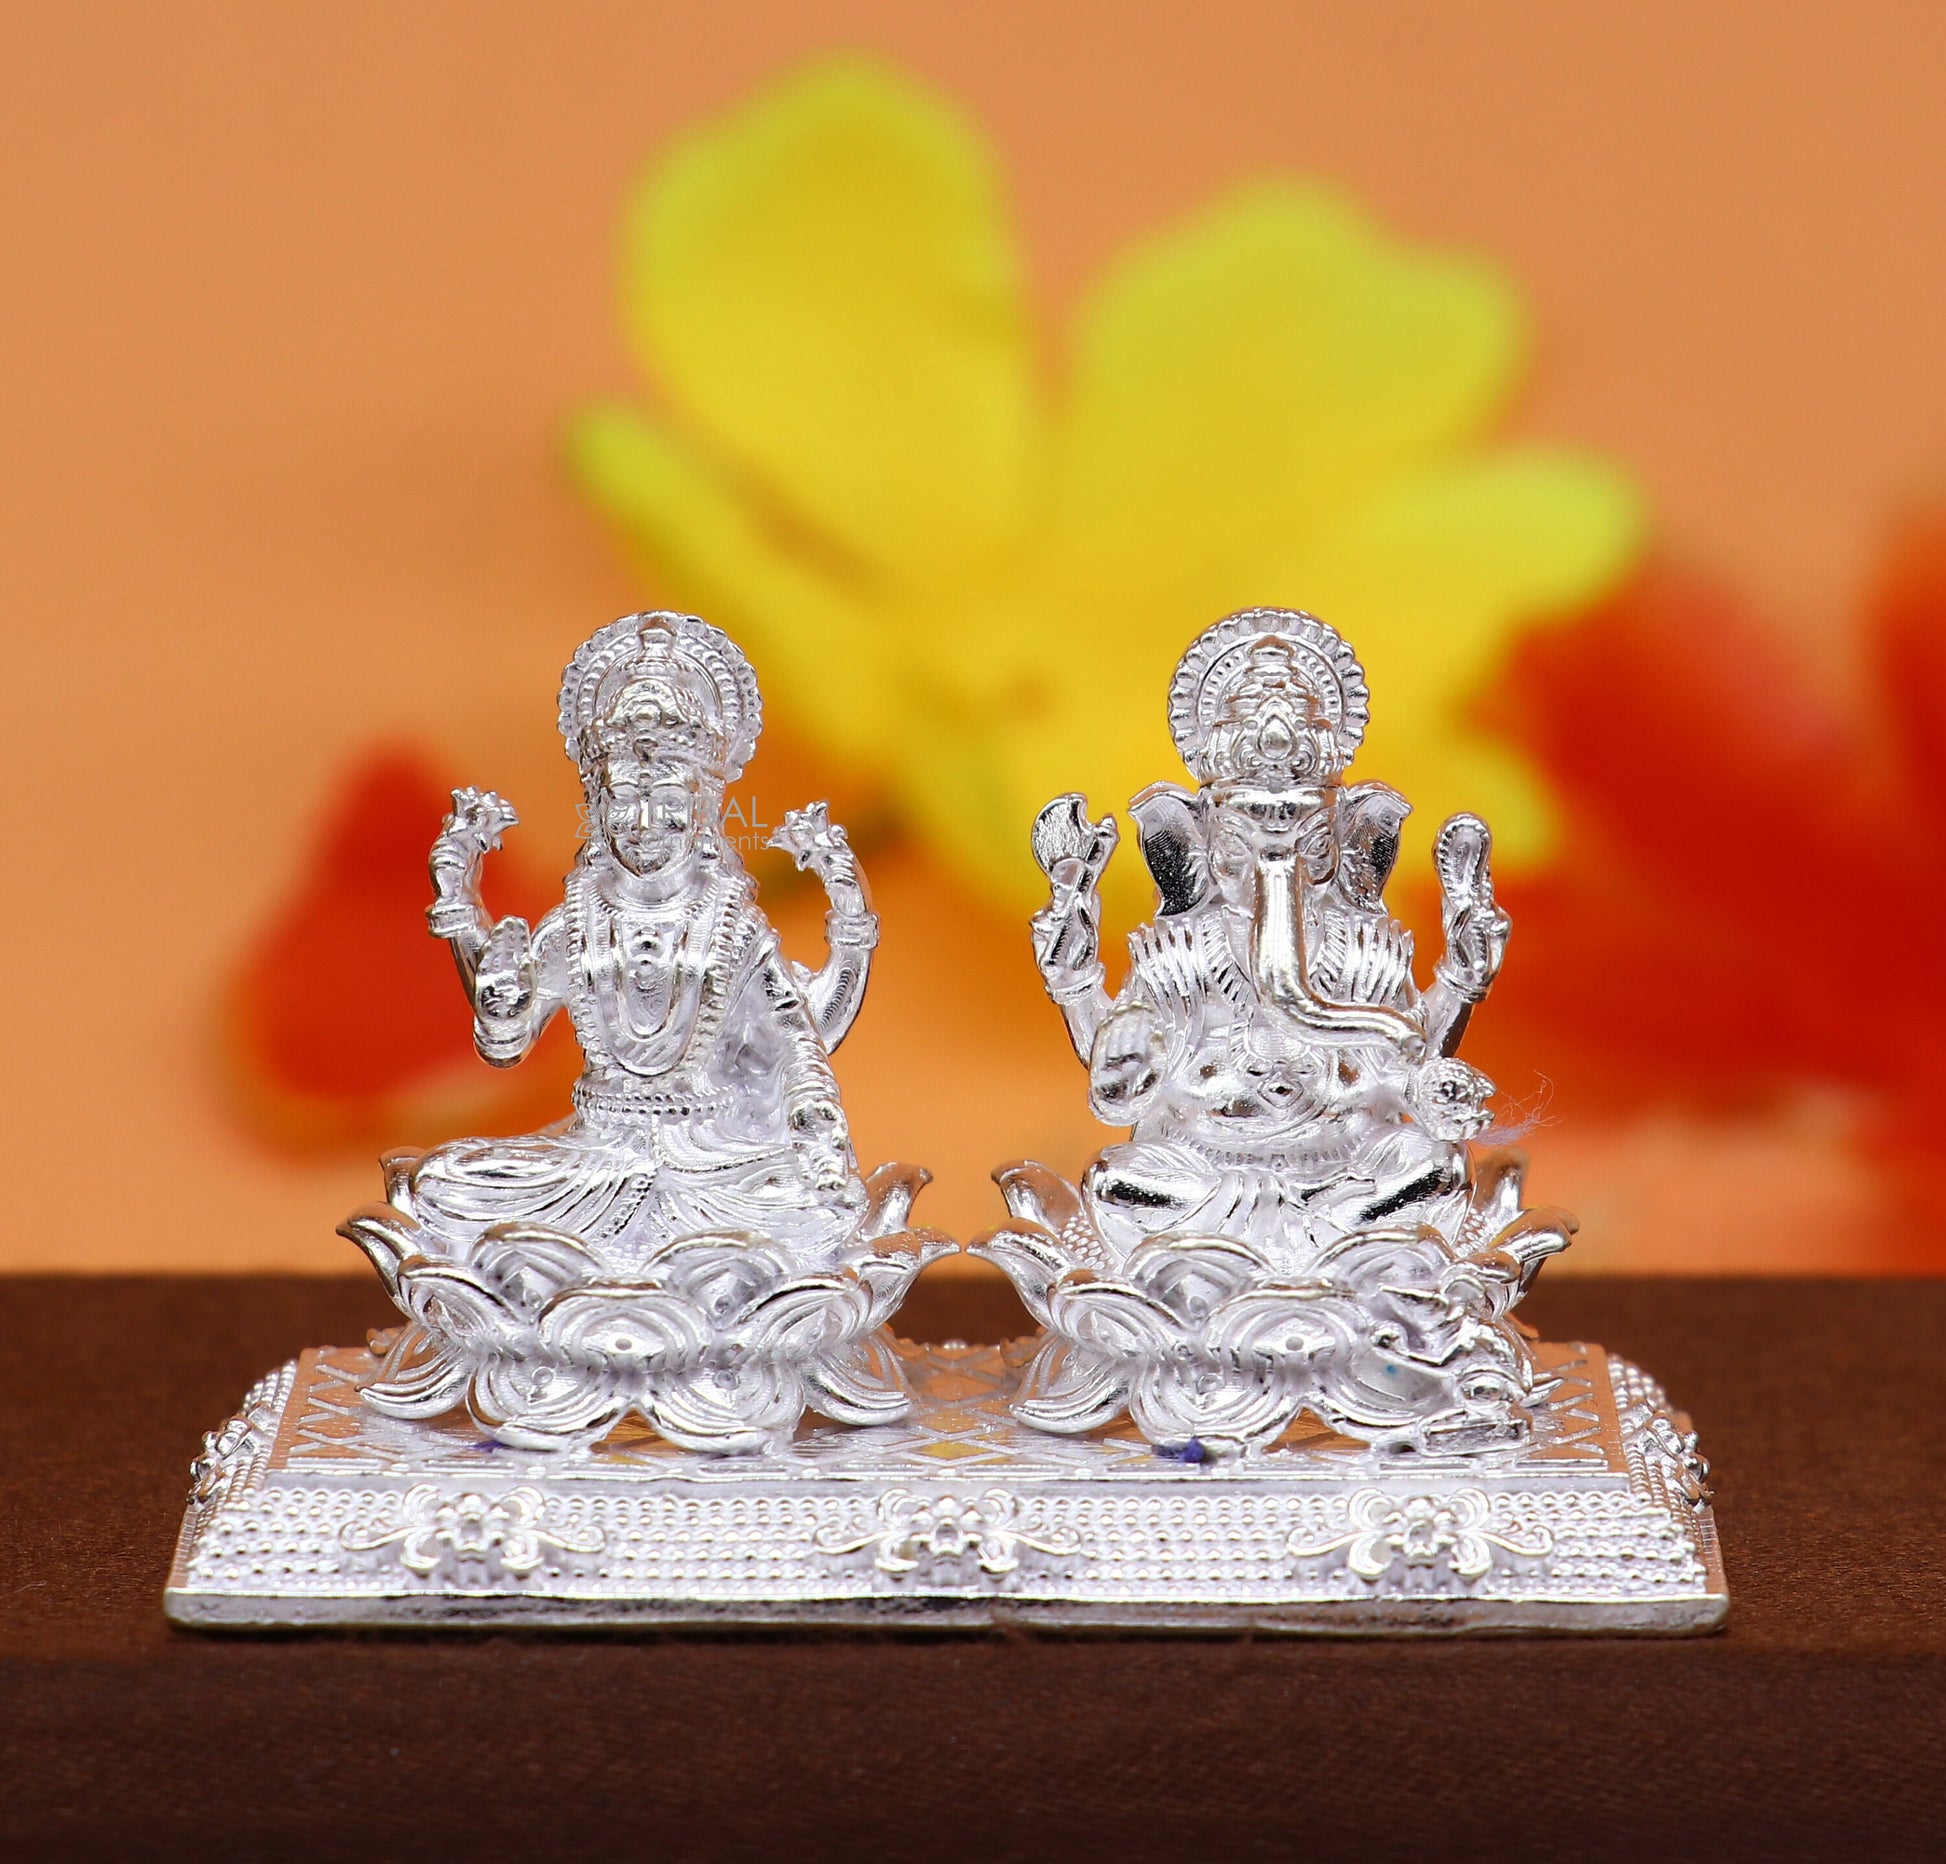 1.2" 925 Sterling silver Lakshmi and Ganesha statue, puja article figurine, Diwali puja brings joy, hope, and wealth to the owners art726 - TRIBAL ORNAMENTS